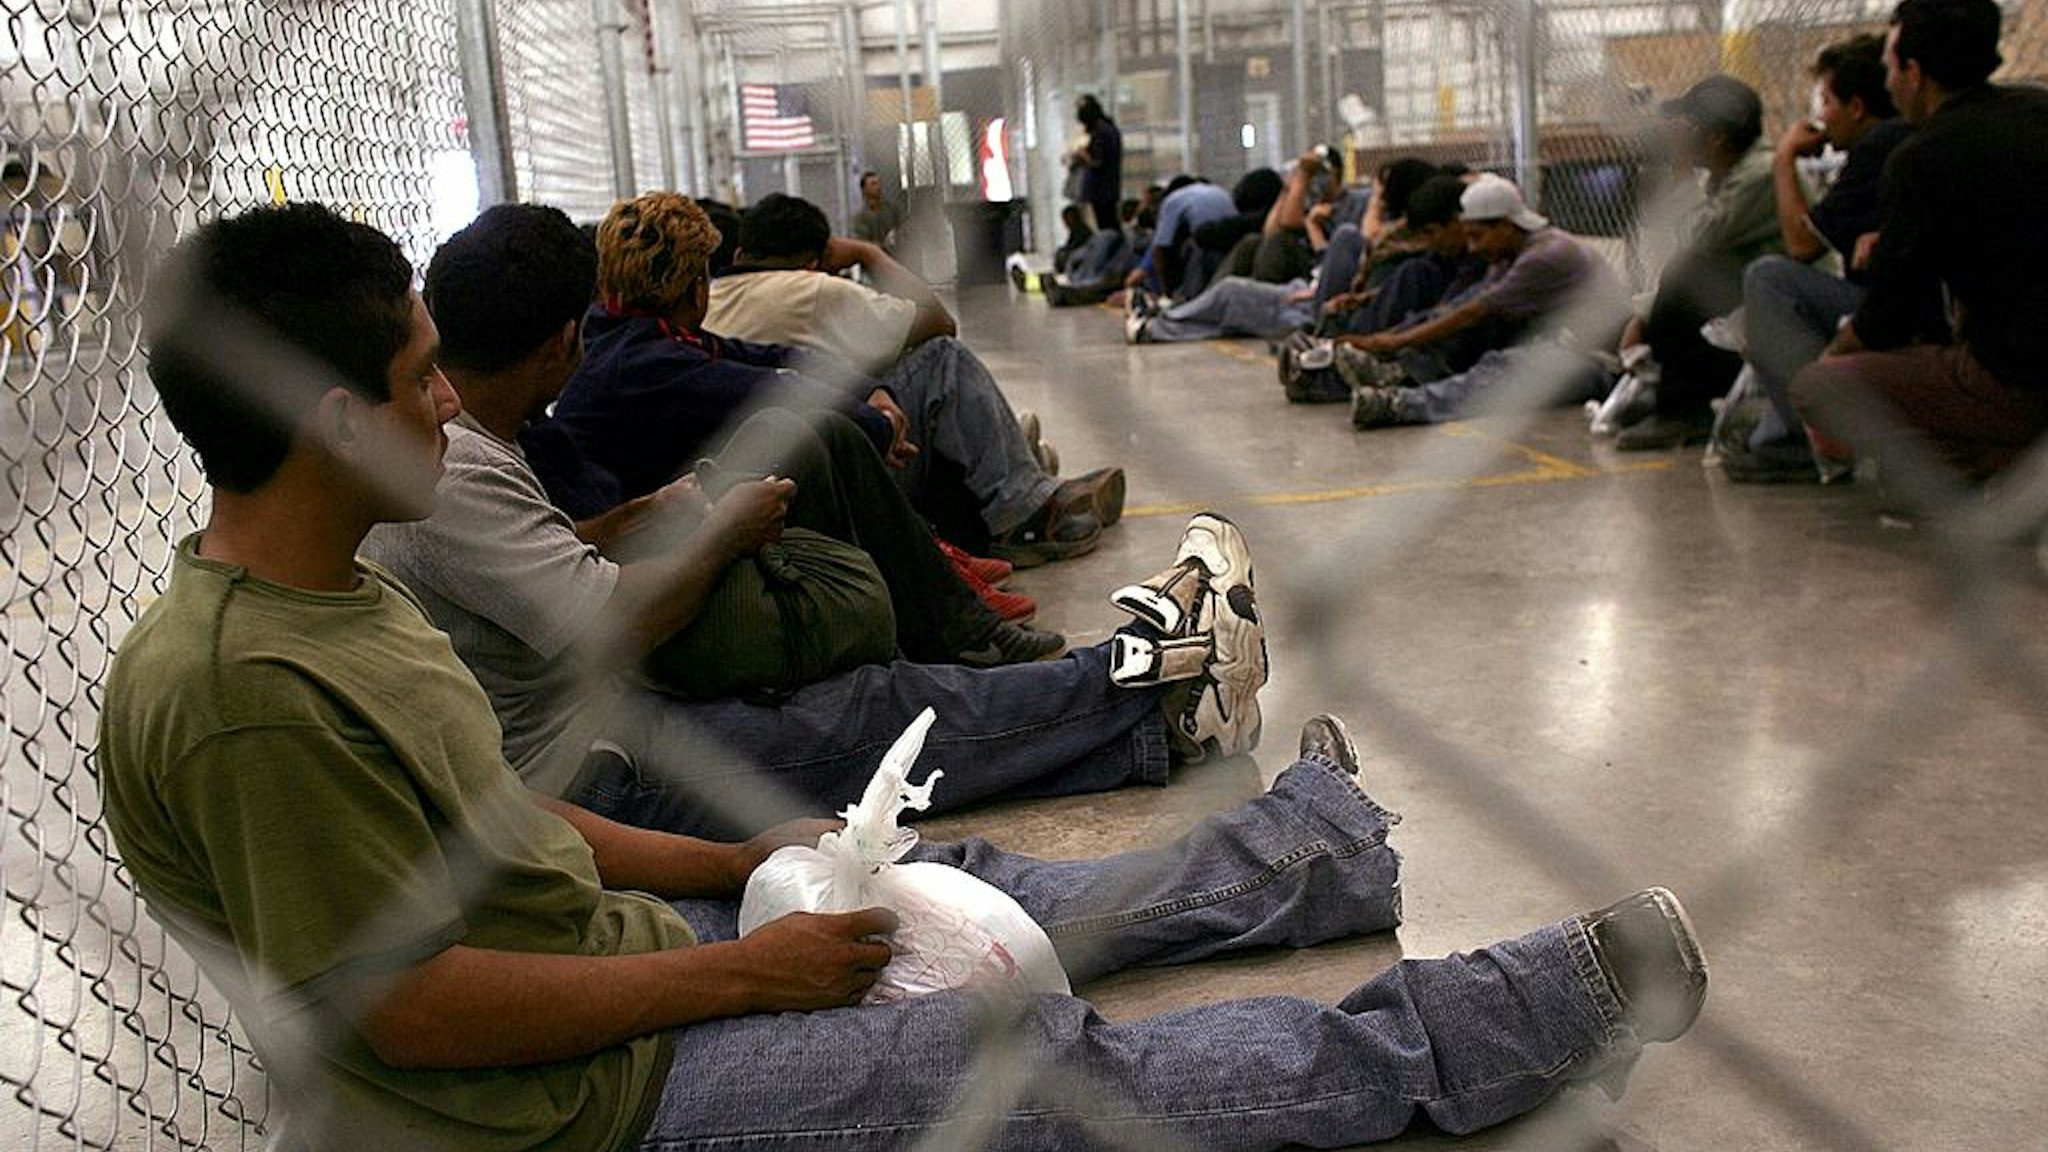 NOGALES, AZ - JUNE 21: Men who were caught crossing the U.S. border with Mexico illegally wait in a holding cell on June 21, 2006 at the U.S. Border Patrol processing center in Nogales, Arizona. U.S. President George W. Bush plans to deploy a total 6,000 National Guard soldiers in the four southern border states in an attempt to mitigate illegal immigration into America. Detentions along the U.S.-Mexico border decreased by 21 percent to 26,994, in the first 10 days of June according to U.S. authorities compared. (Photo by Spencer Platt/Getty Images)